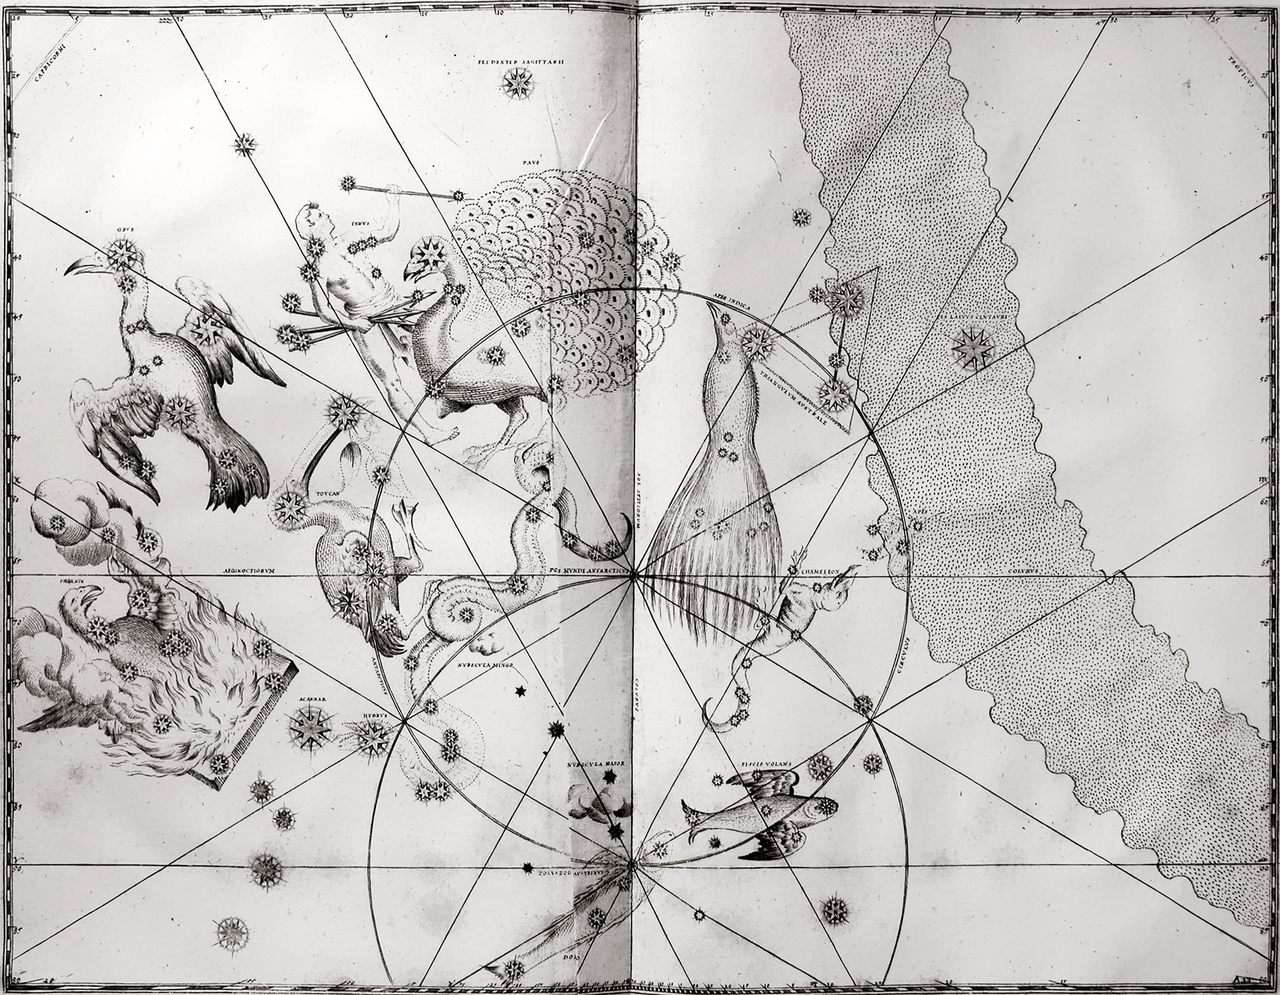 Chart 49. A print of the copperplate engraving of Johann Bayer's 1661 edition of <em>Uranometria</em>, which depicts 12 new constellations.